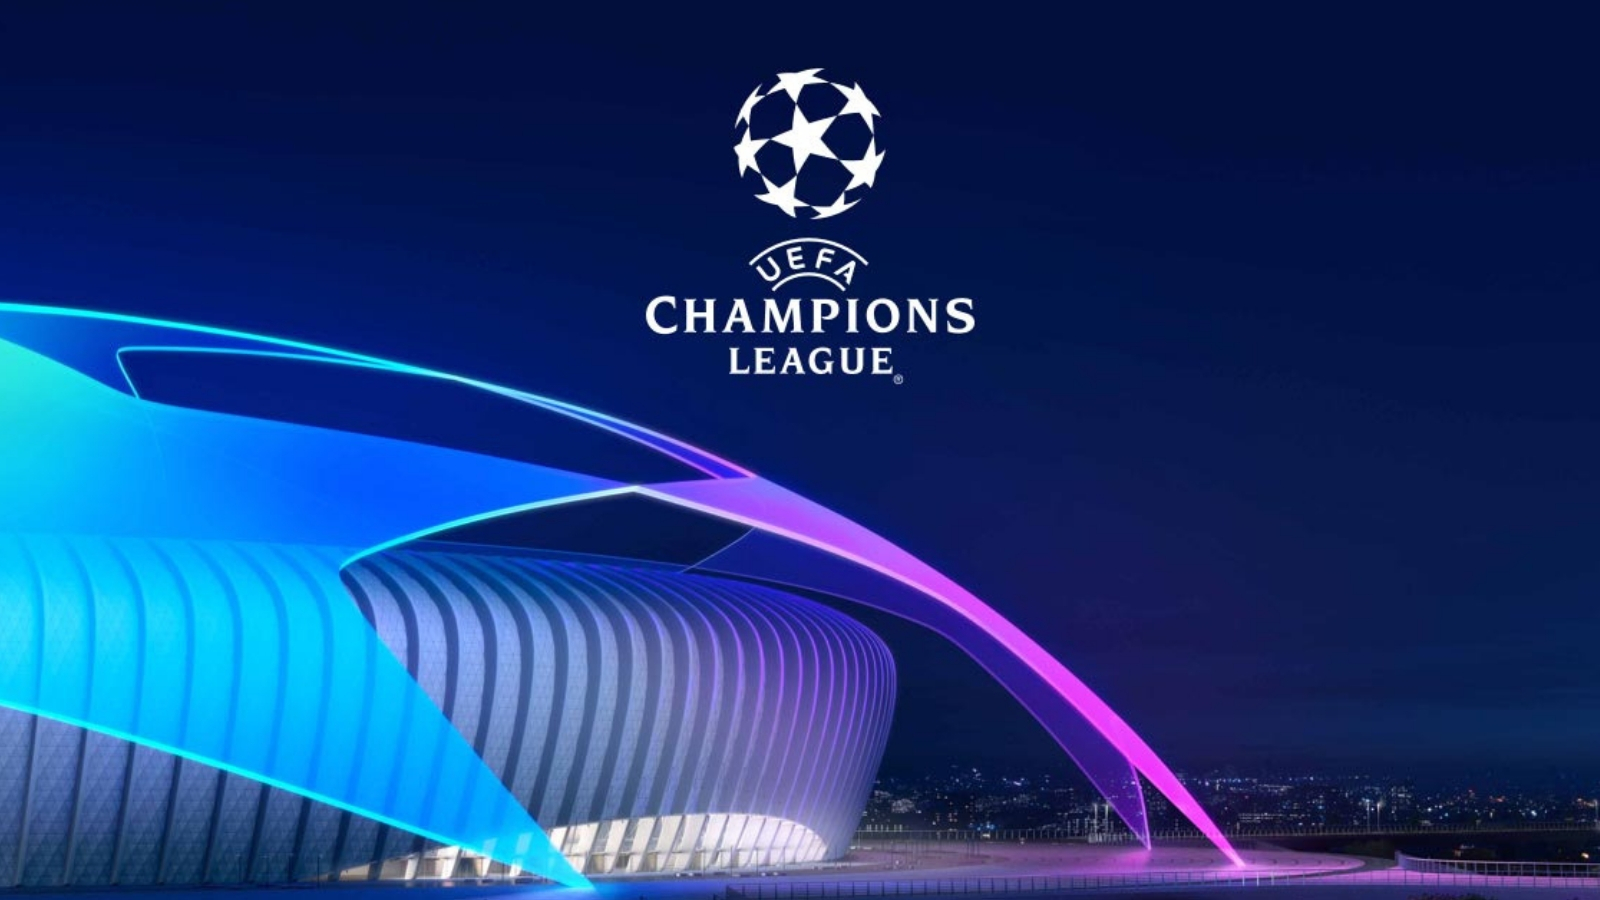 Uefa Champions League Wallpapers